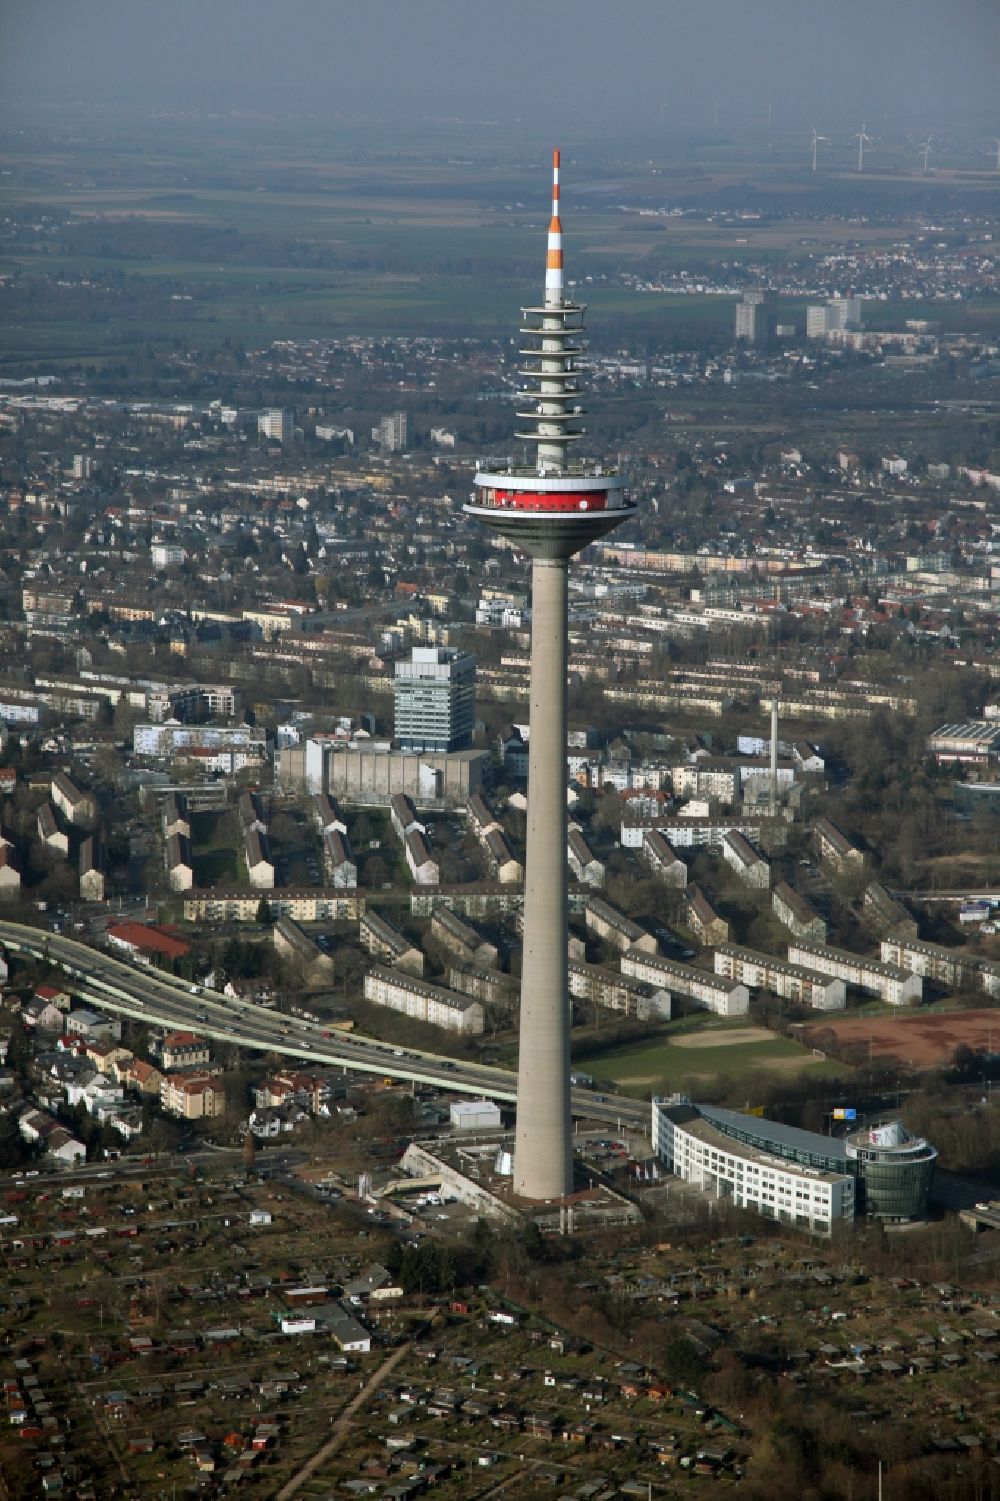 Frankfurt am Main from above - The Europe Tower in Frankfurt am Main, Bockenheim in Hesse is usually referred to as a television tower